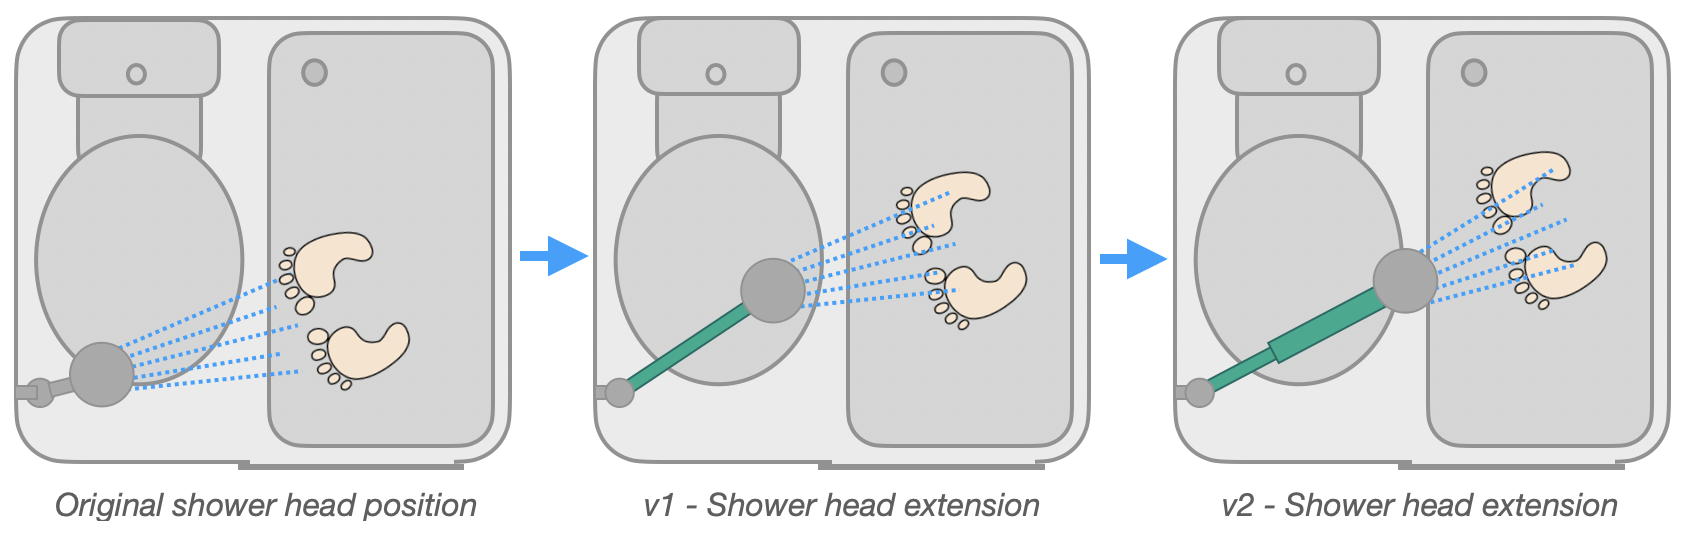 Shower head extensions